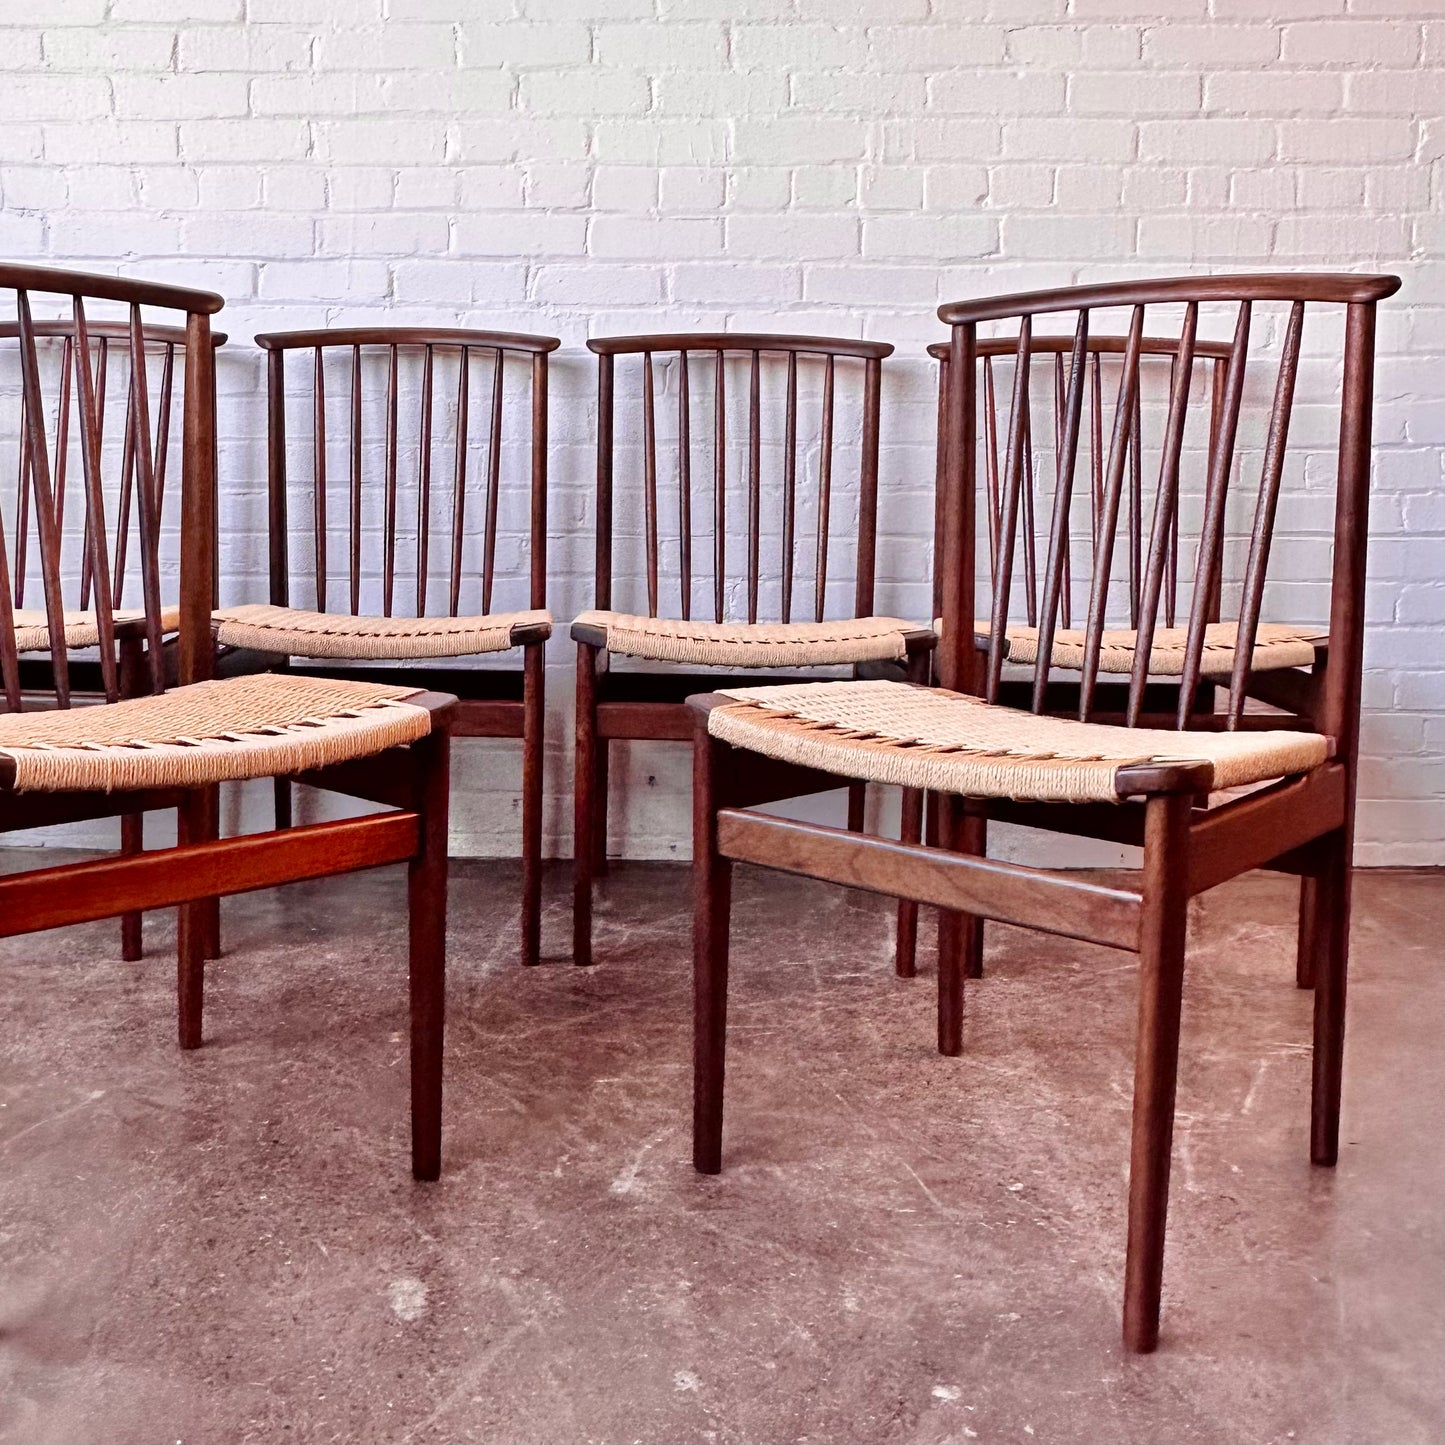 SET OF 6 MID-CENTURY MODERN SYLVE STENQUIST FOR DUX DINING CHAIRS, 1950'S